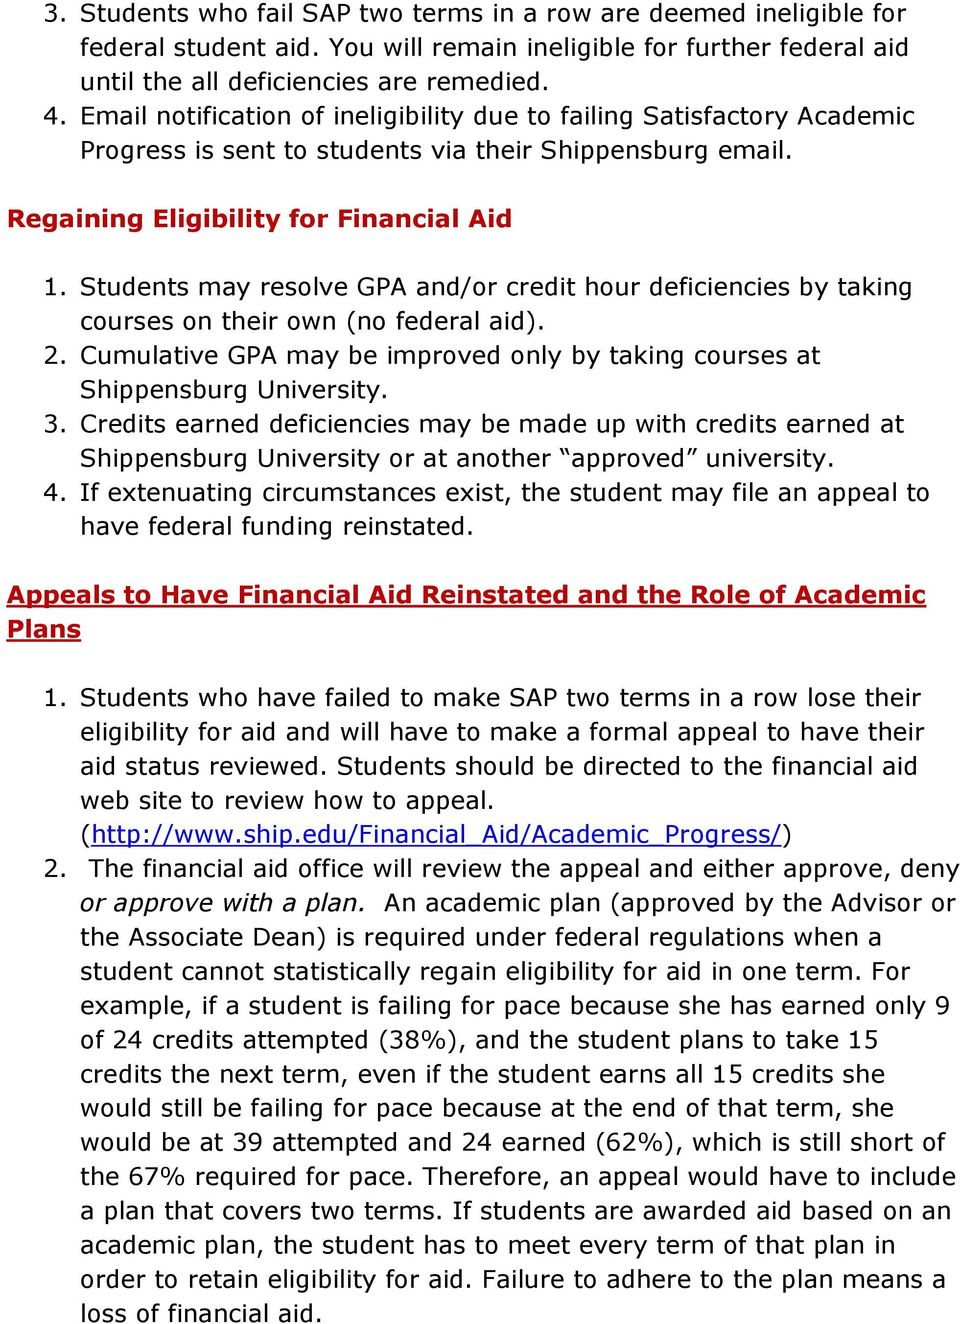 Students may resolve GPA and/or credit hour deficiencies by taking courses on their own (no federal aid). 2. Cumulative GPA may be improved only by taking courses at Shippensburg University. 3.